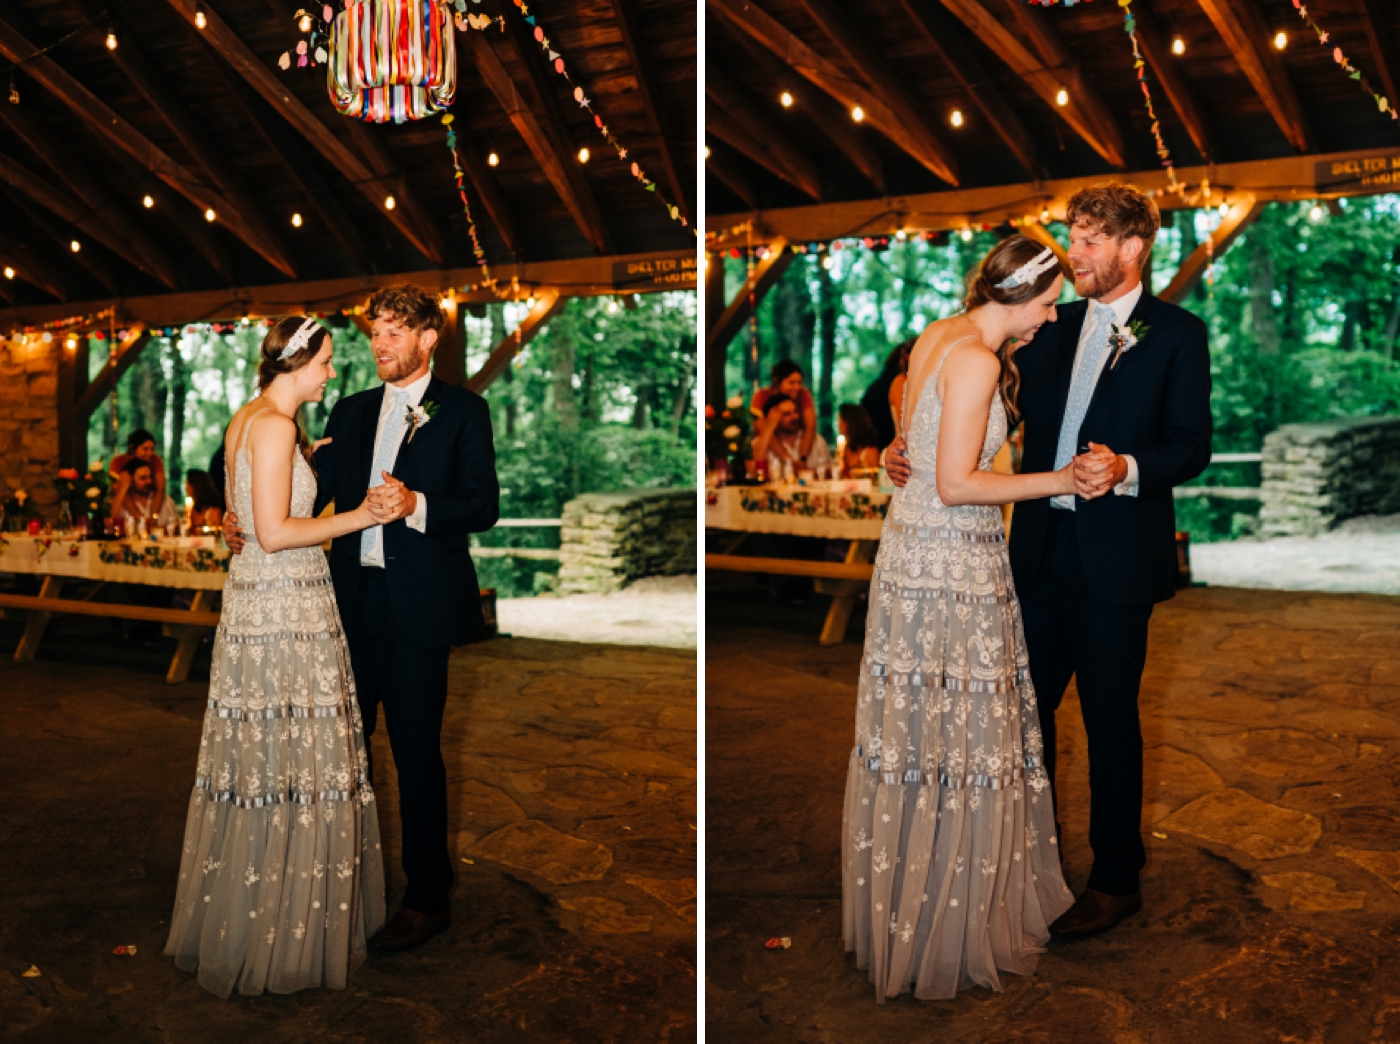 Bride and groom first dance at Rustic wedding decor for wedding at Brown County State Park